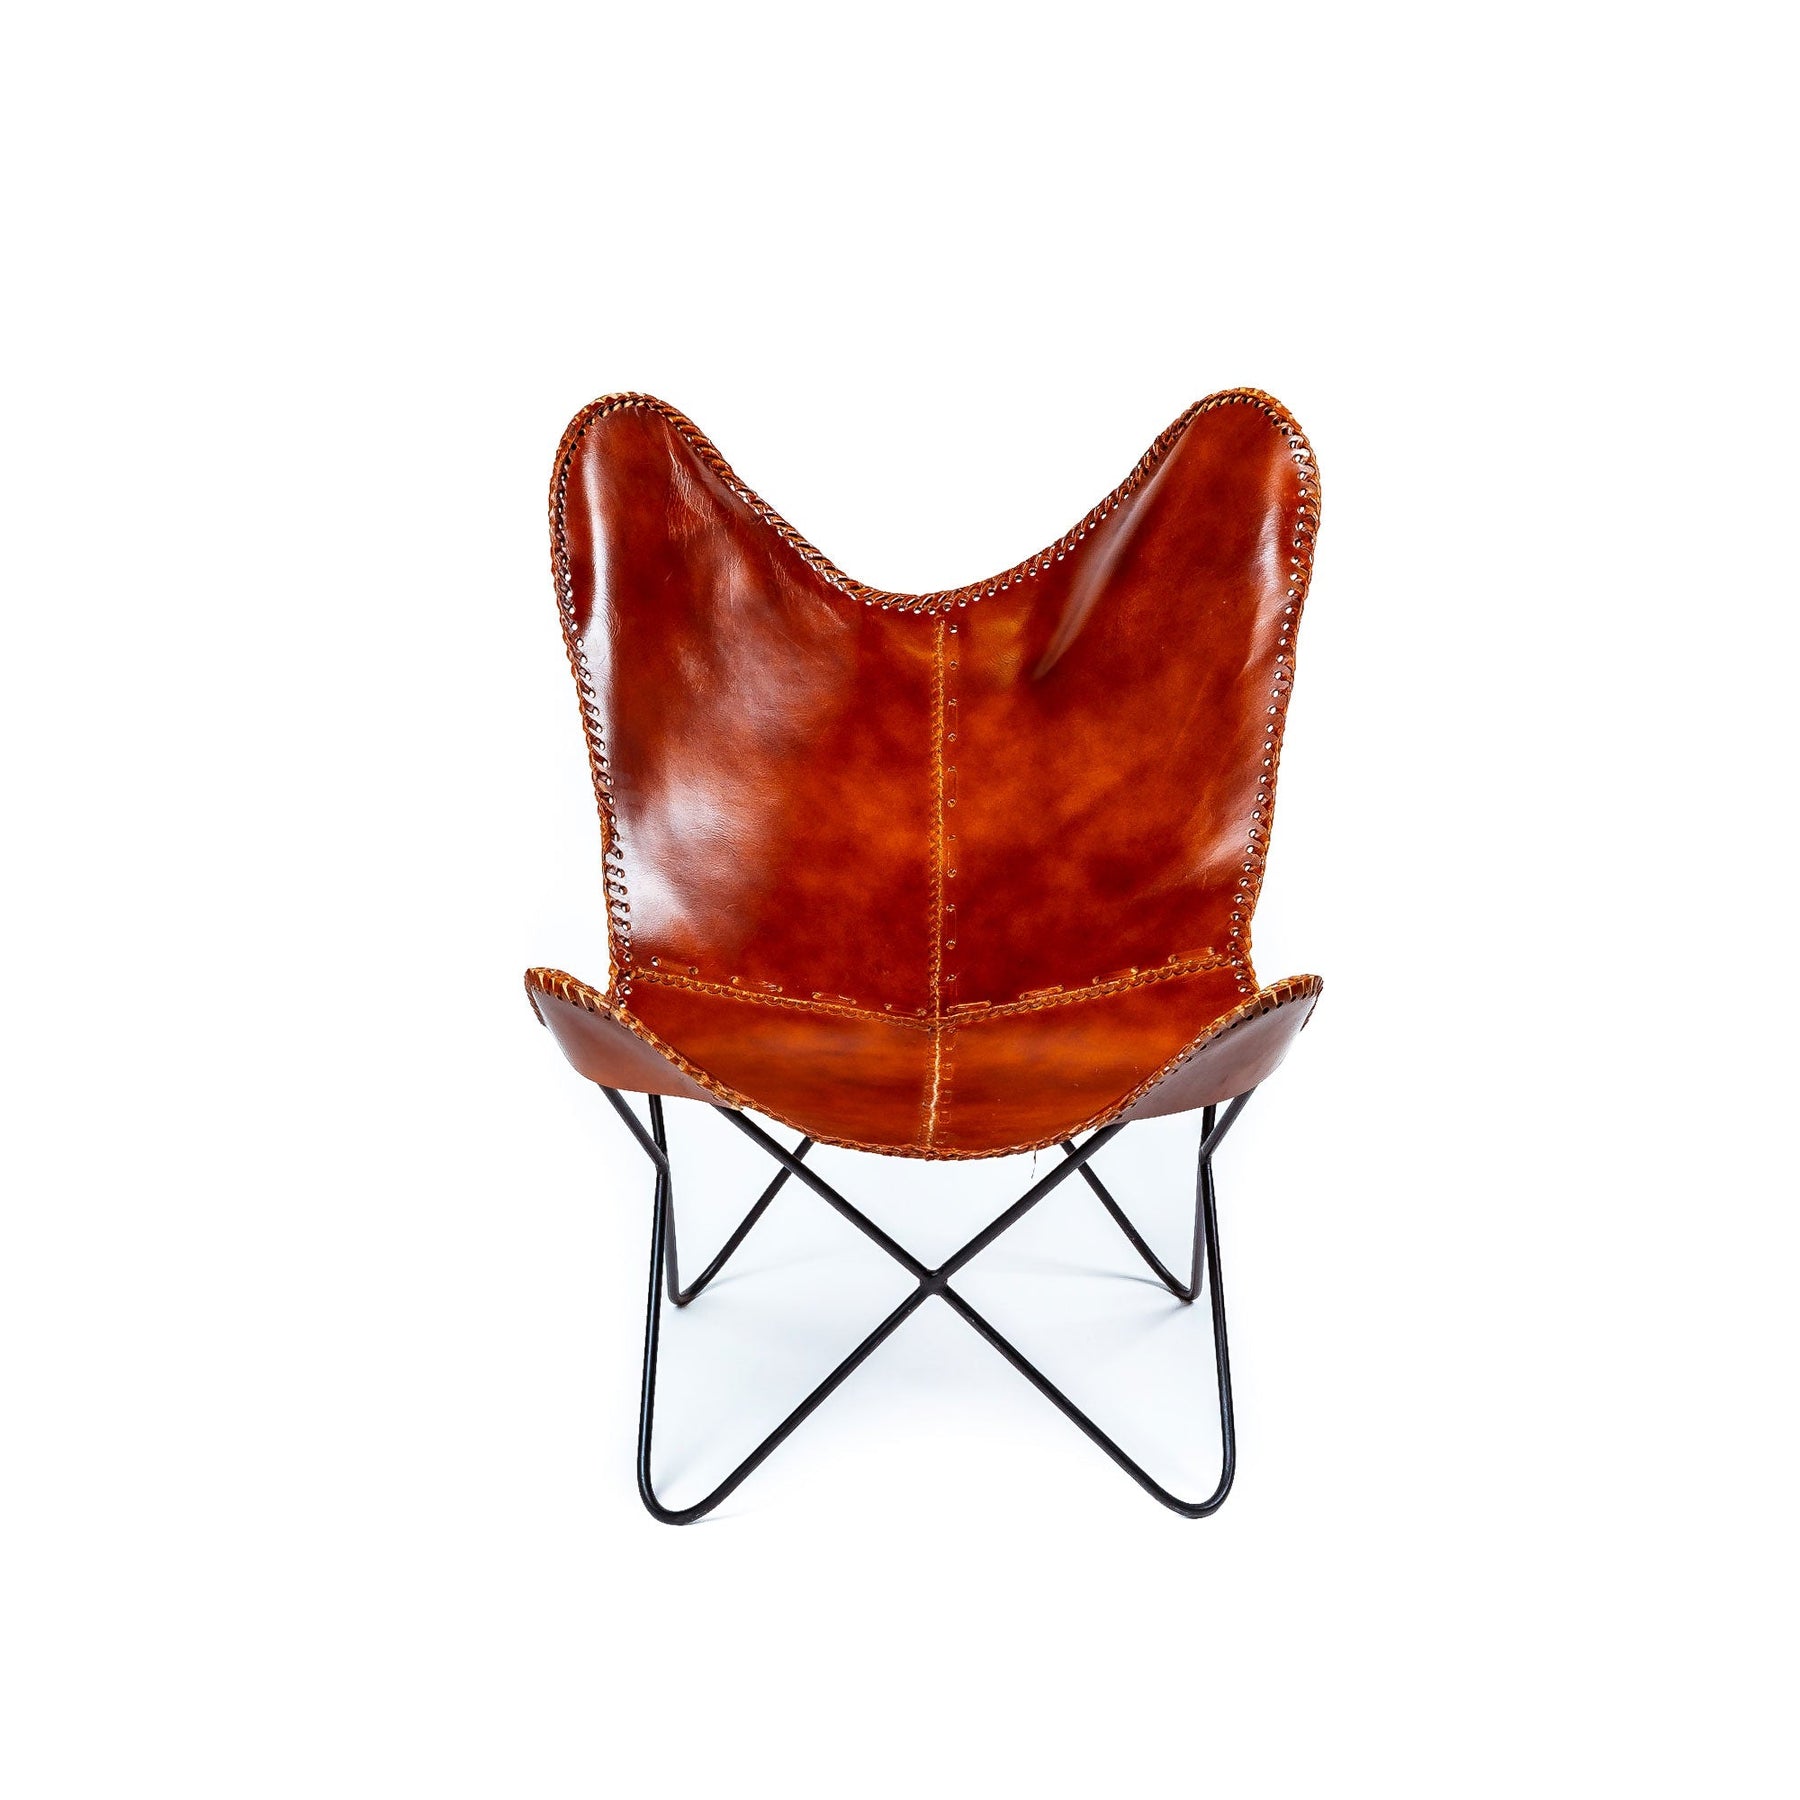 Leather Butterfly Chair | Living Room Brown Leather Chair | 27 x 30 x 29 inches